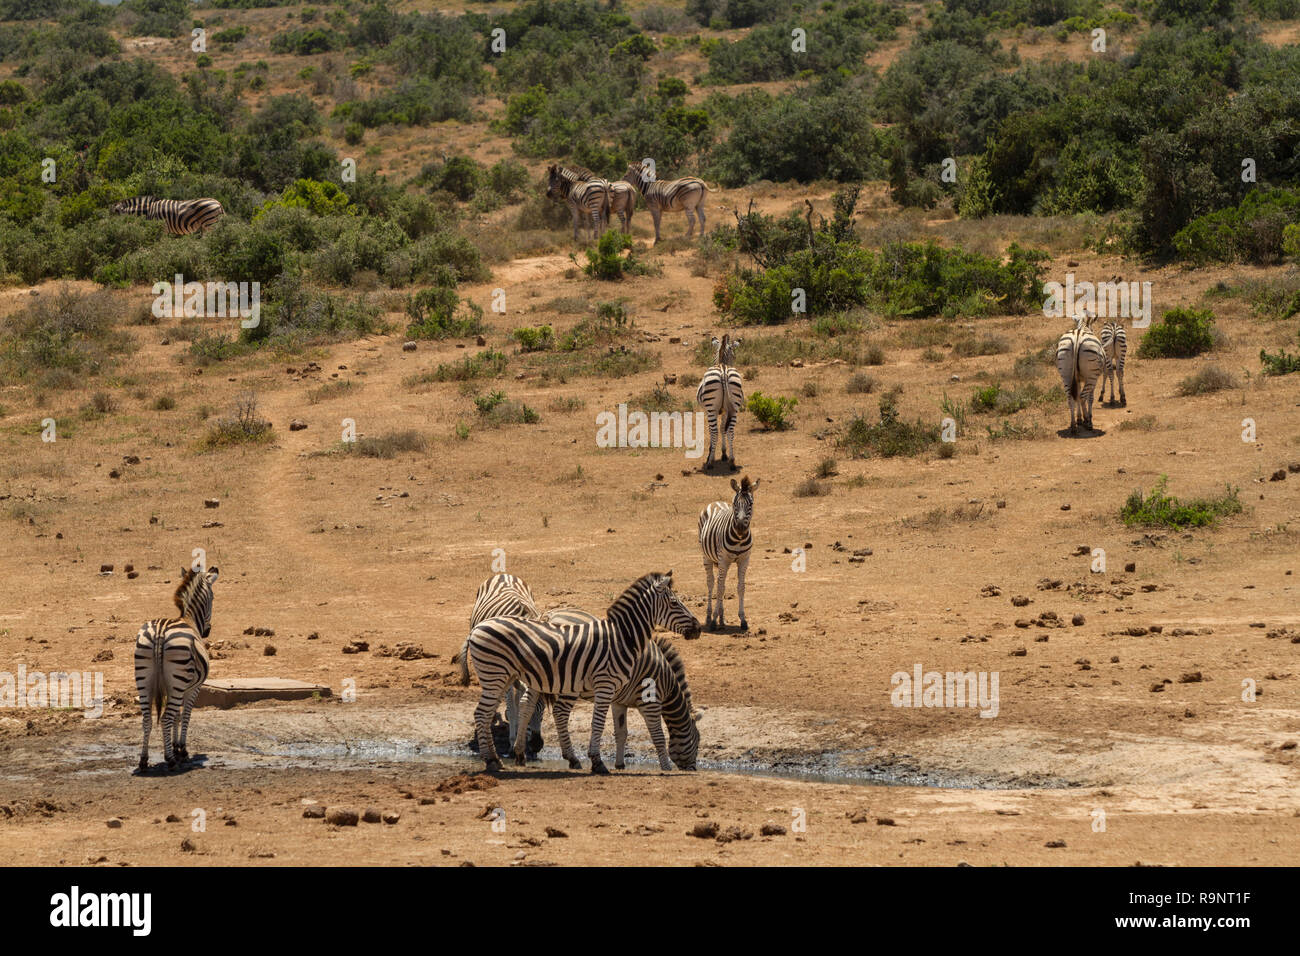 Zebras at a waterhole, Addo Elephant National Park, South Africa Stock Photo